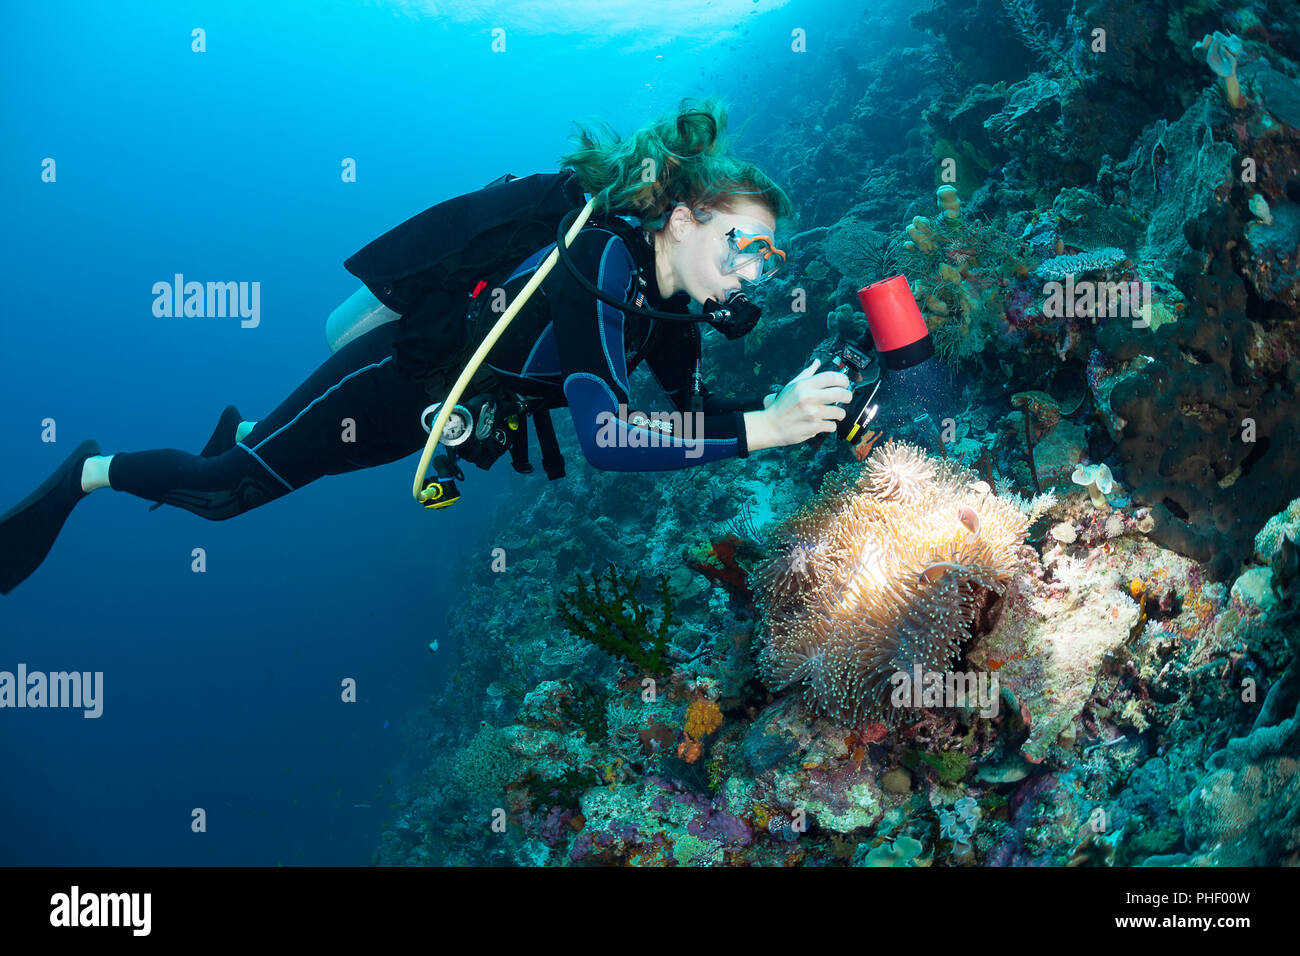 A diver (MR) lines up her camera on anemonefish, Amphiprion percula and their anemone. Wakatobi, Indonesia. Stock Photo